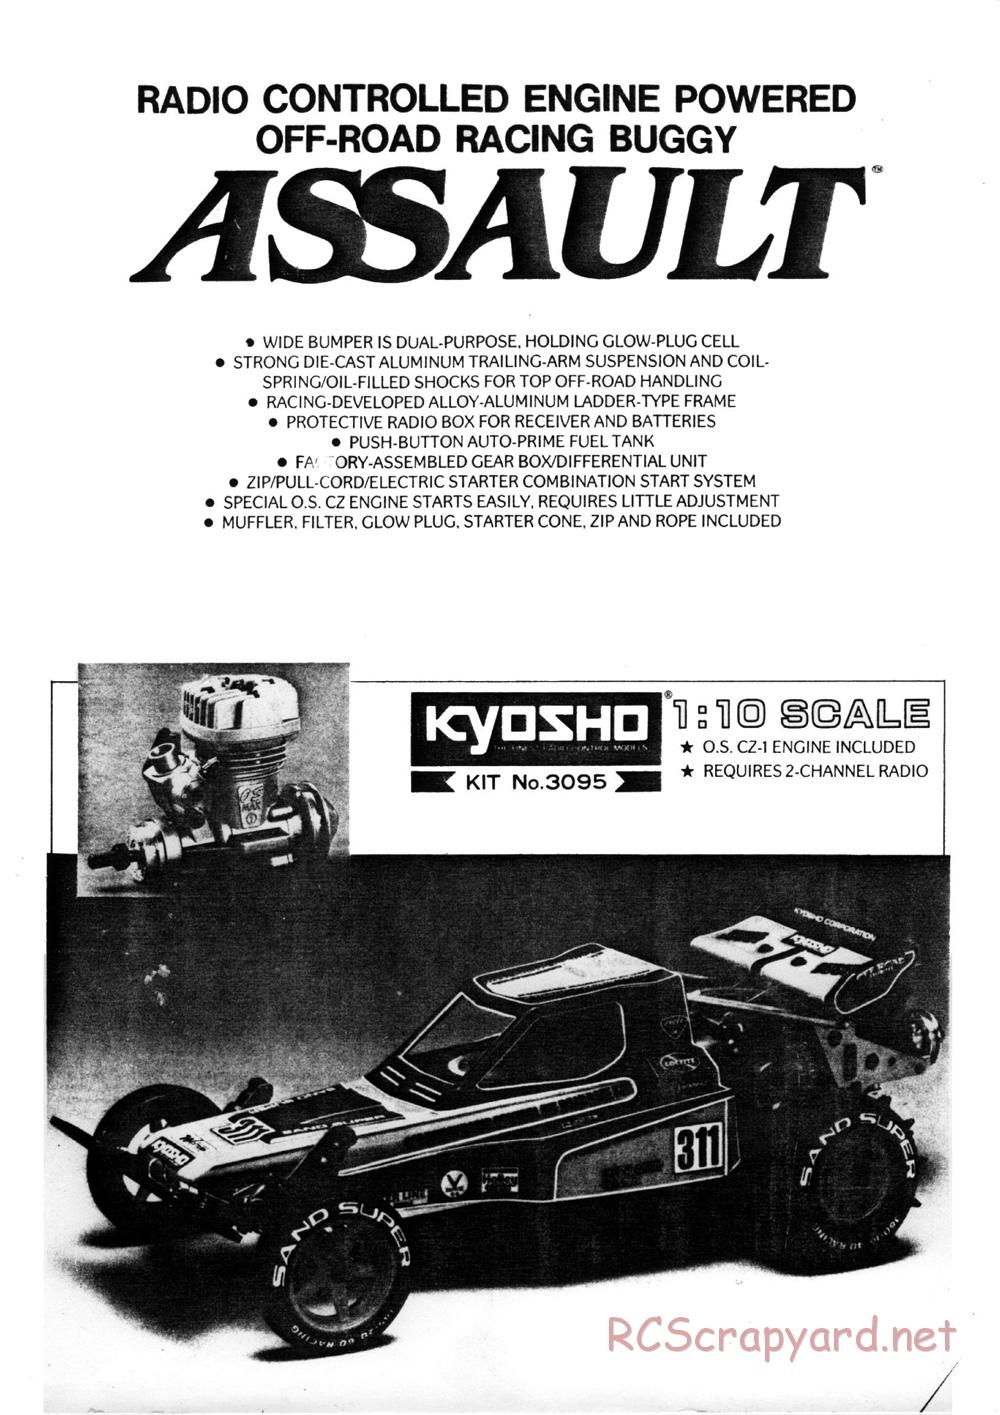 Kyosho - Assault - Manual - Page 1